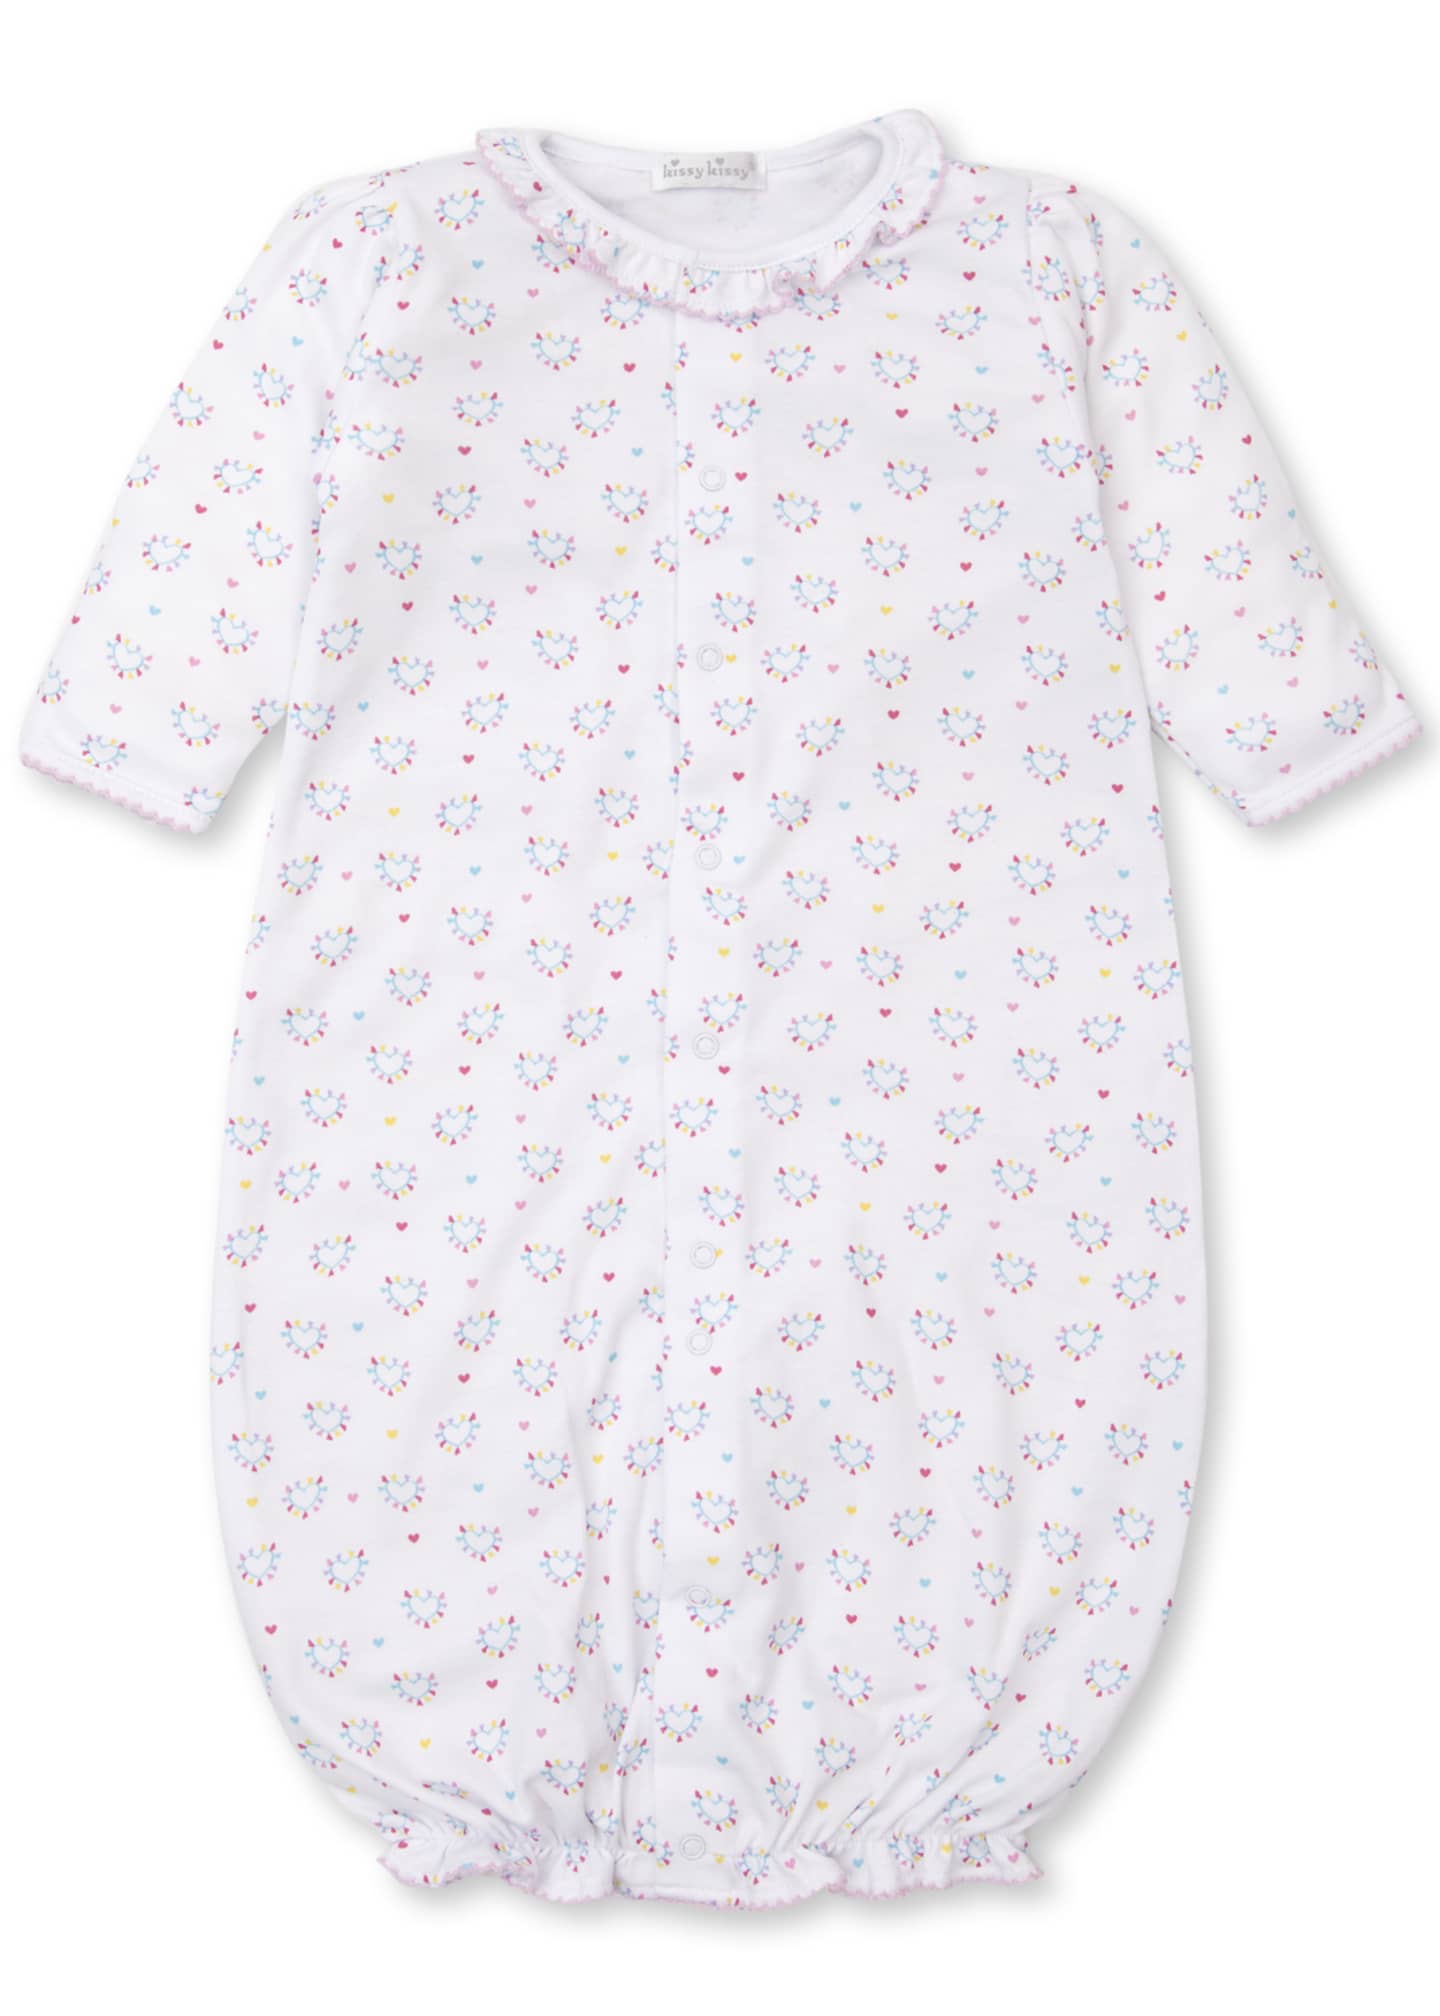 small baby gown